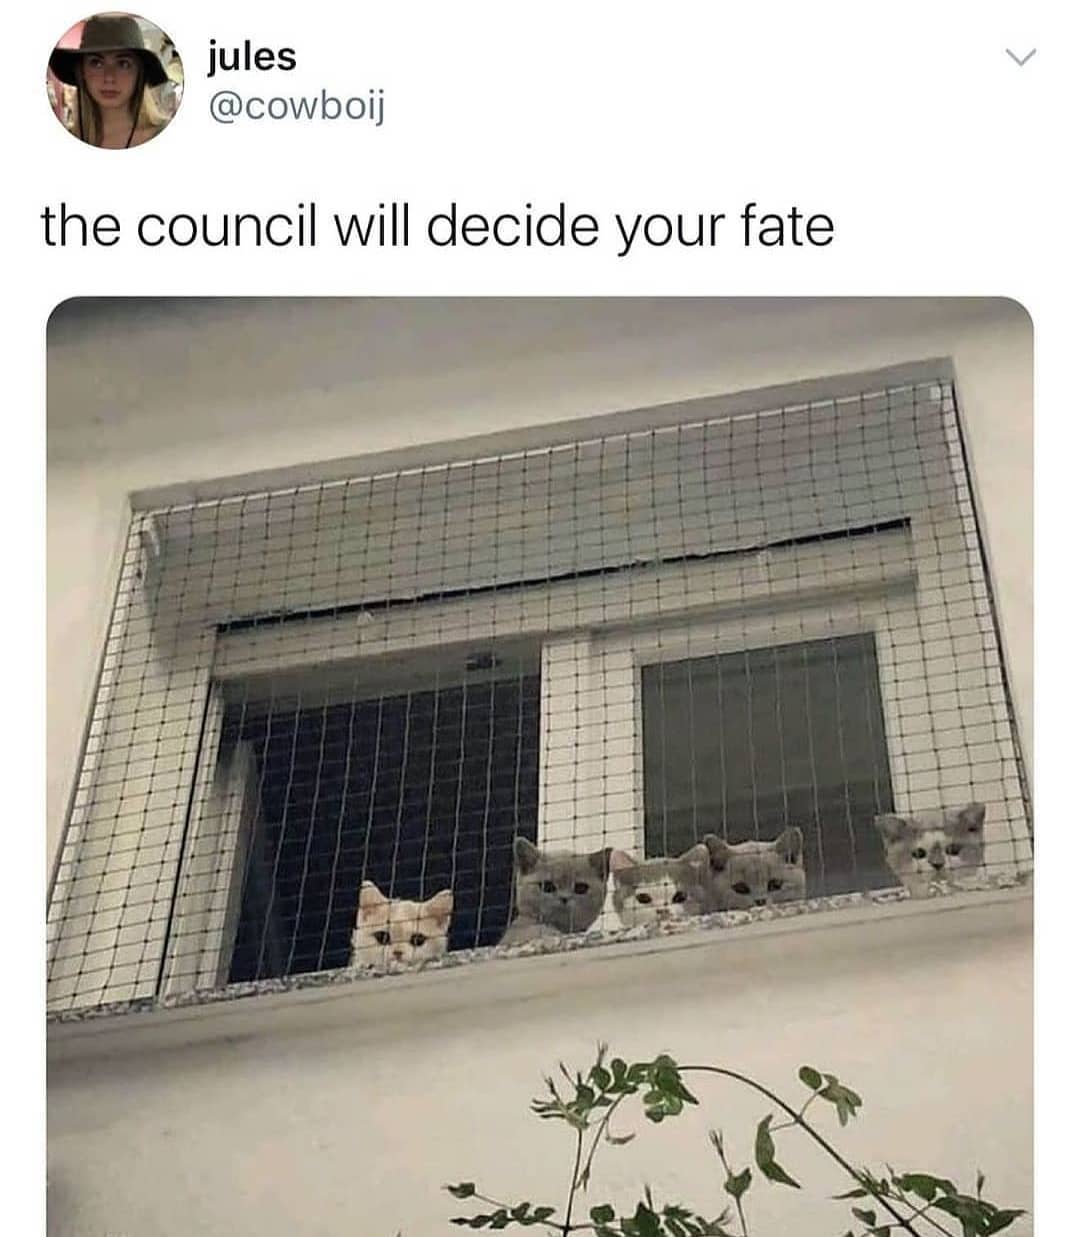 what have they decided :
︎
■
︎
#catmemes #cat #cats #wholesome #kitten #catmeme…